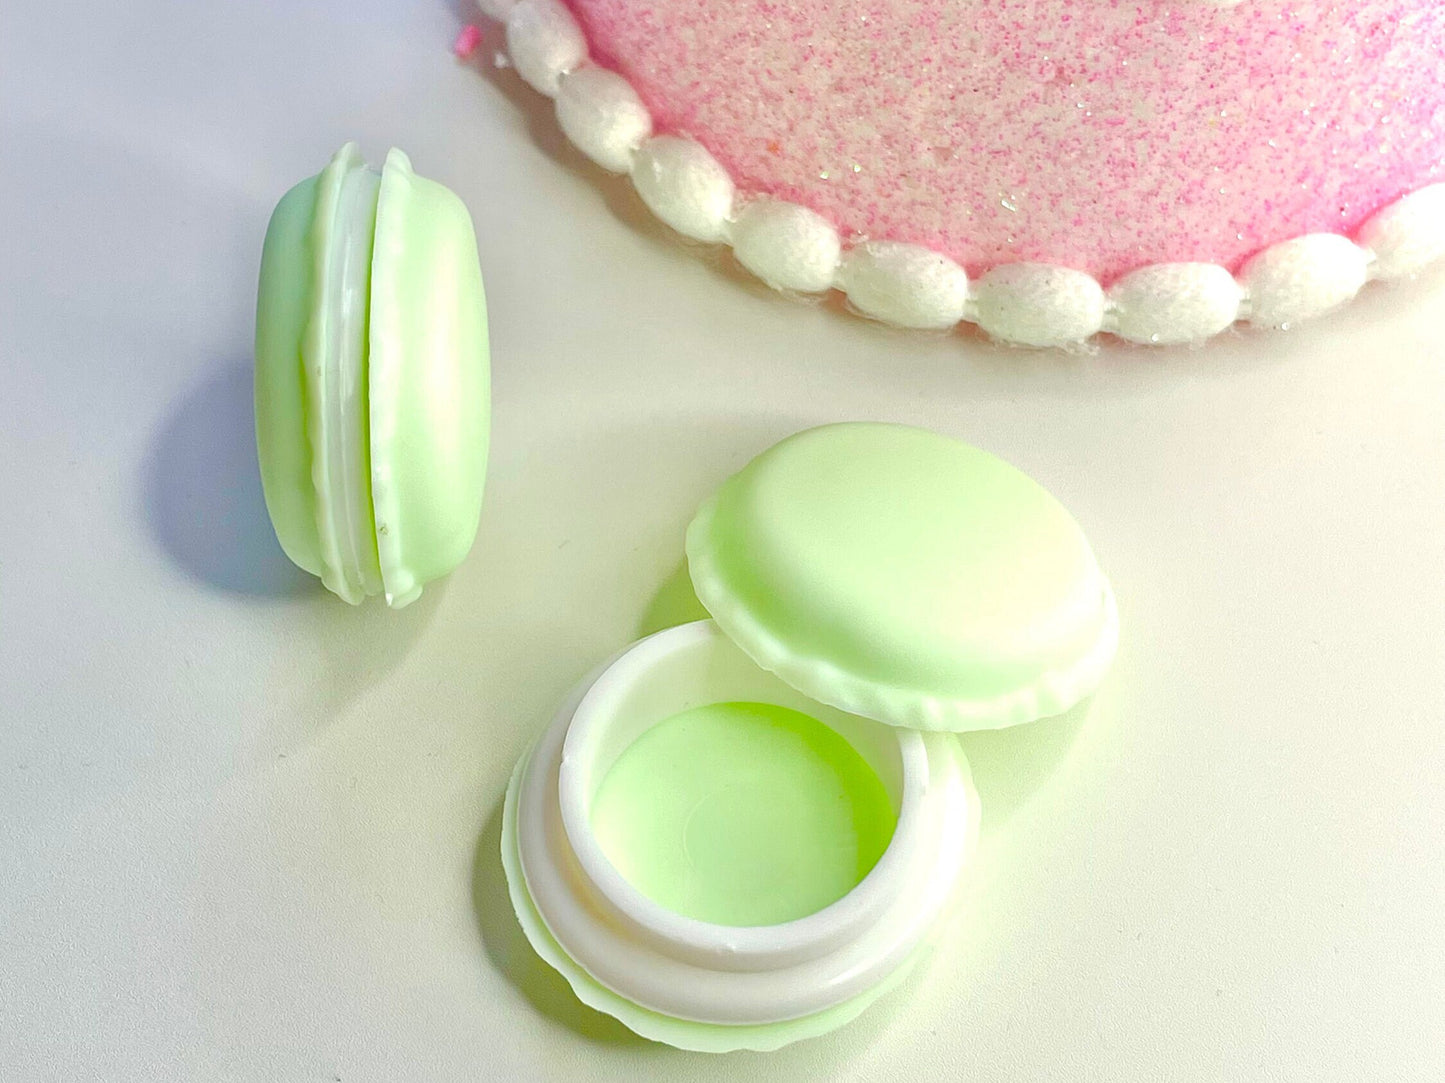 Treat yourself with a delightful Macaroon Gift Box!